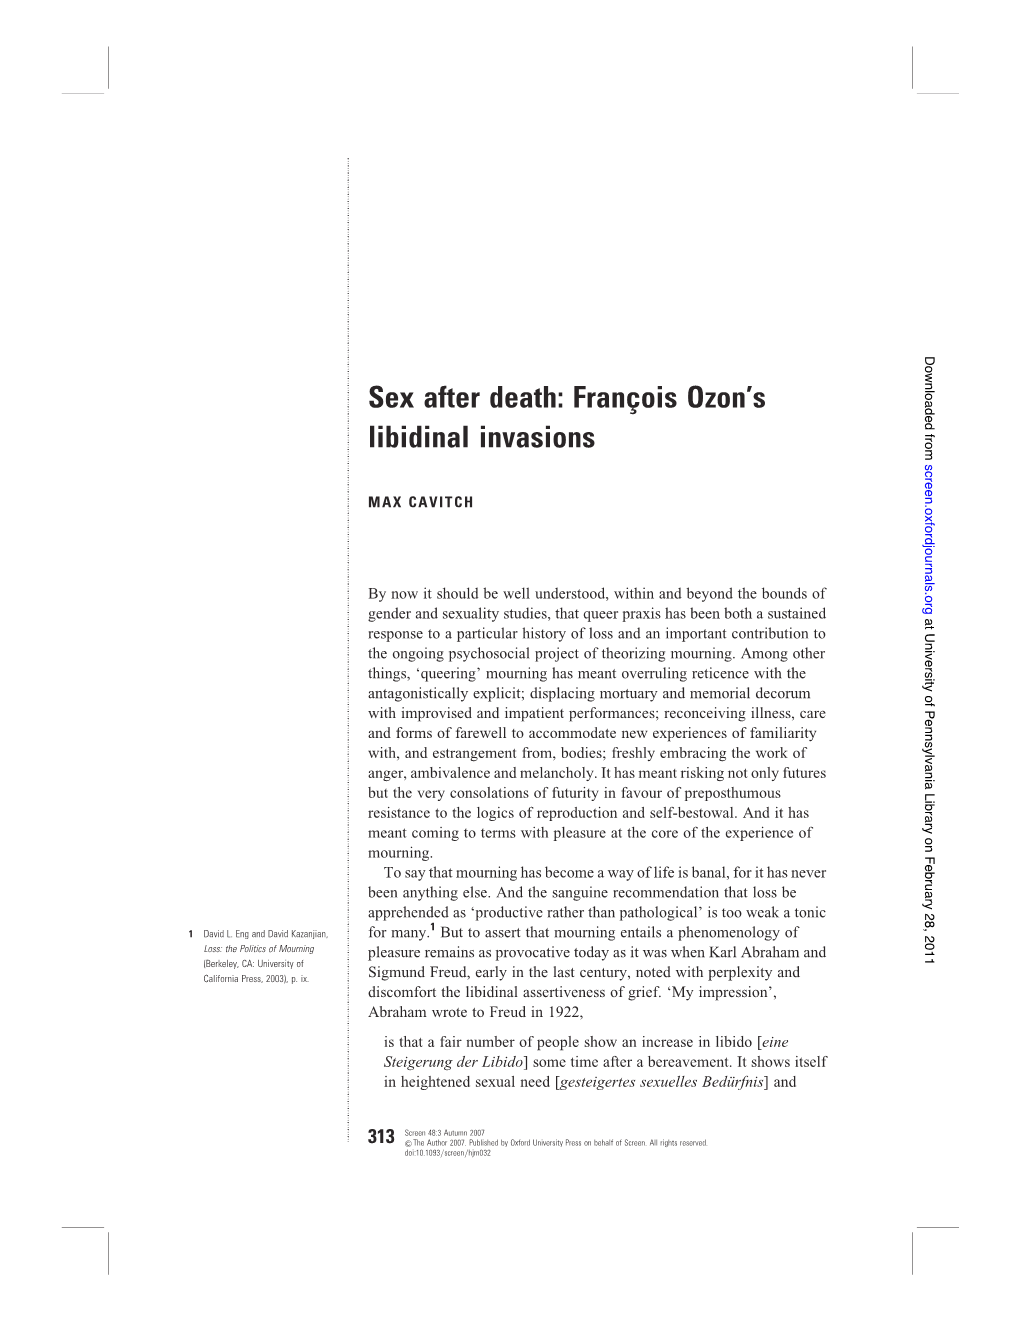 Sex After Death: Franc¸Ois Ozon’S Libidinal Invasions Screen.Oxfordjournals.Org